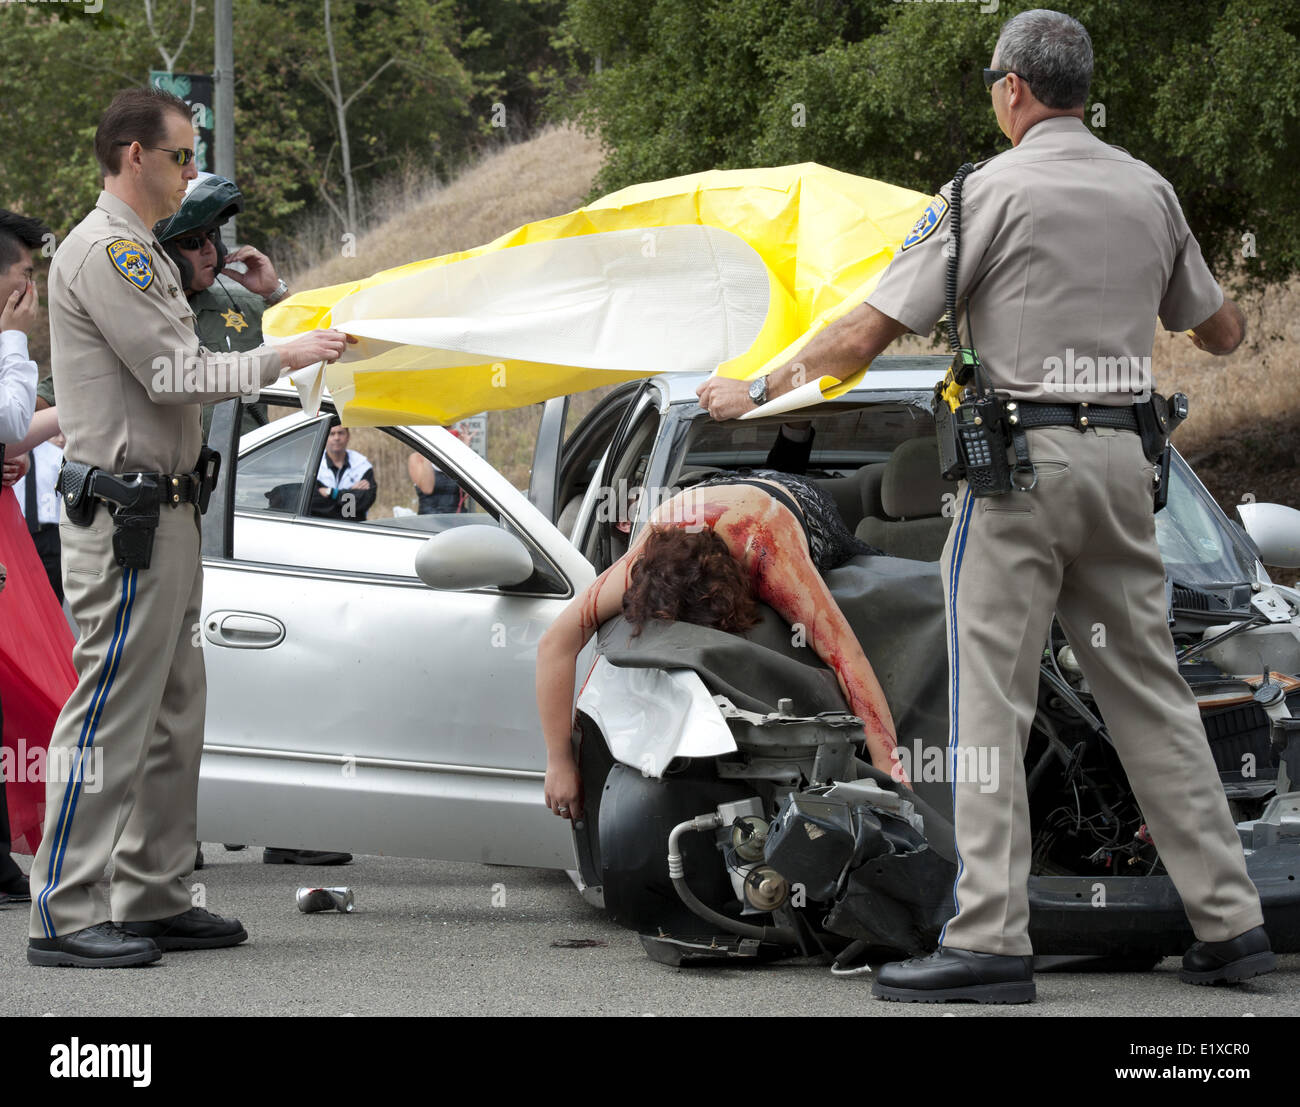 Aliso Niguel, USA. 24th May, 2013. California Highway Patrol officers place a body blanket over an Aliso Viejo High School student volunteer playing the part of a passenger fatality victim, killed in a car driven by a drunk driver. Aliso Niguel High School Students in Orange County, California, were presented with a simulated DUI fatality accident scene on Friday morning. The Orange County Fire Authority, Orange County Sheriff's Department, California Highway Patrol, Mission Hospital, Doctor's Ambulance Service and O'Connor Mortuary along with Aliso Viejo and Laguna Niguel citizen v Stock Photo